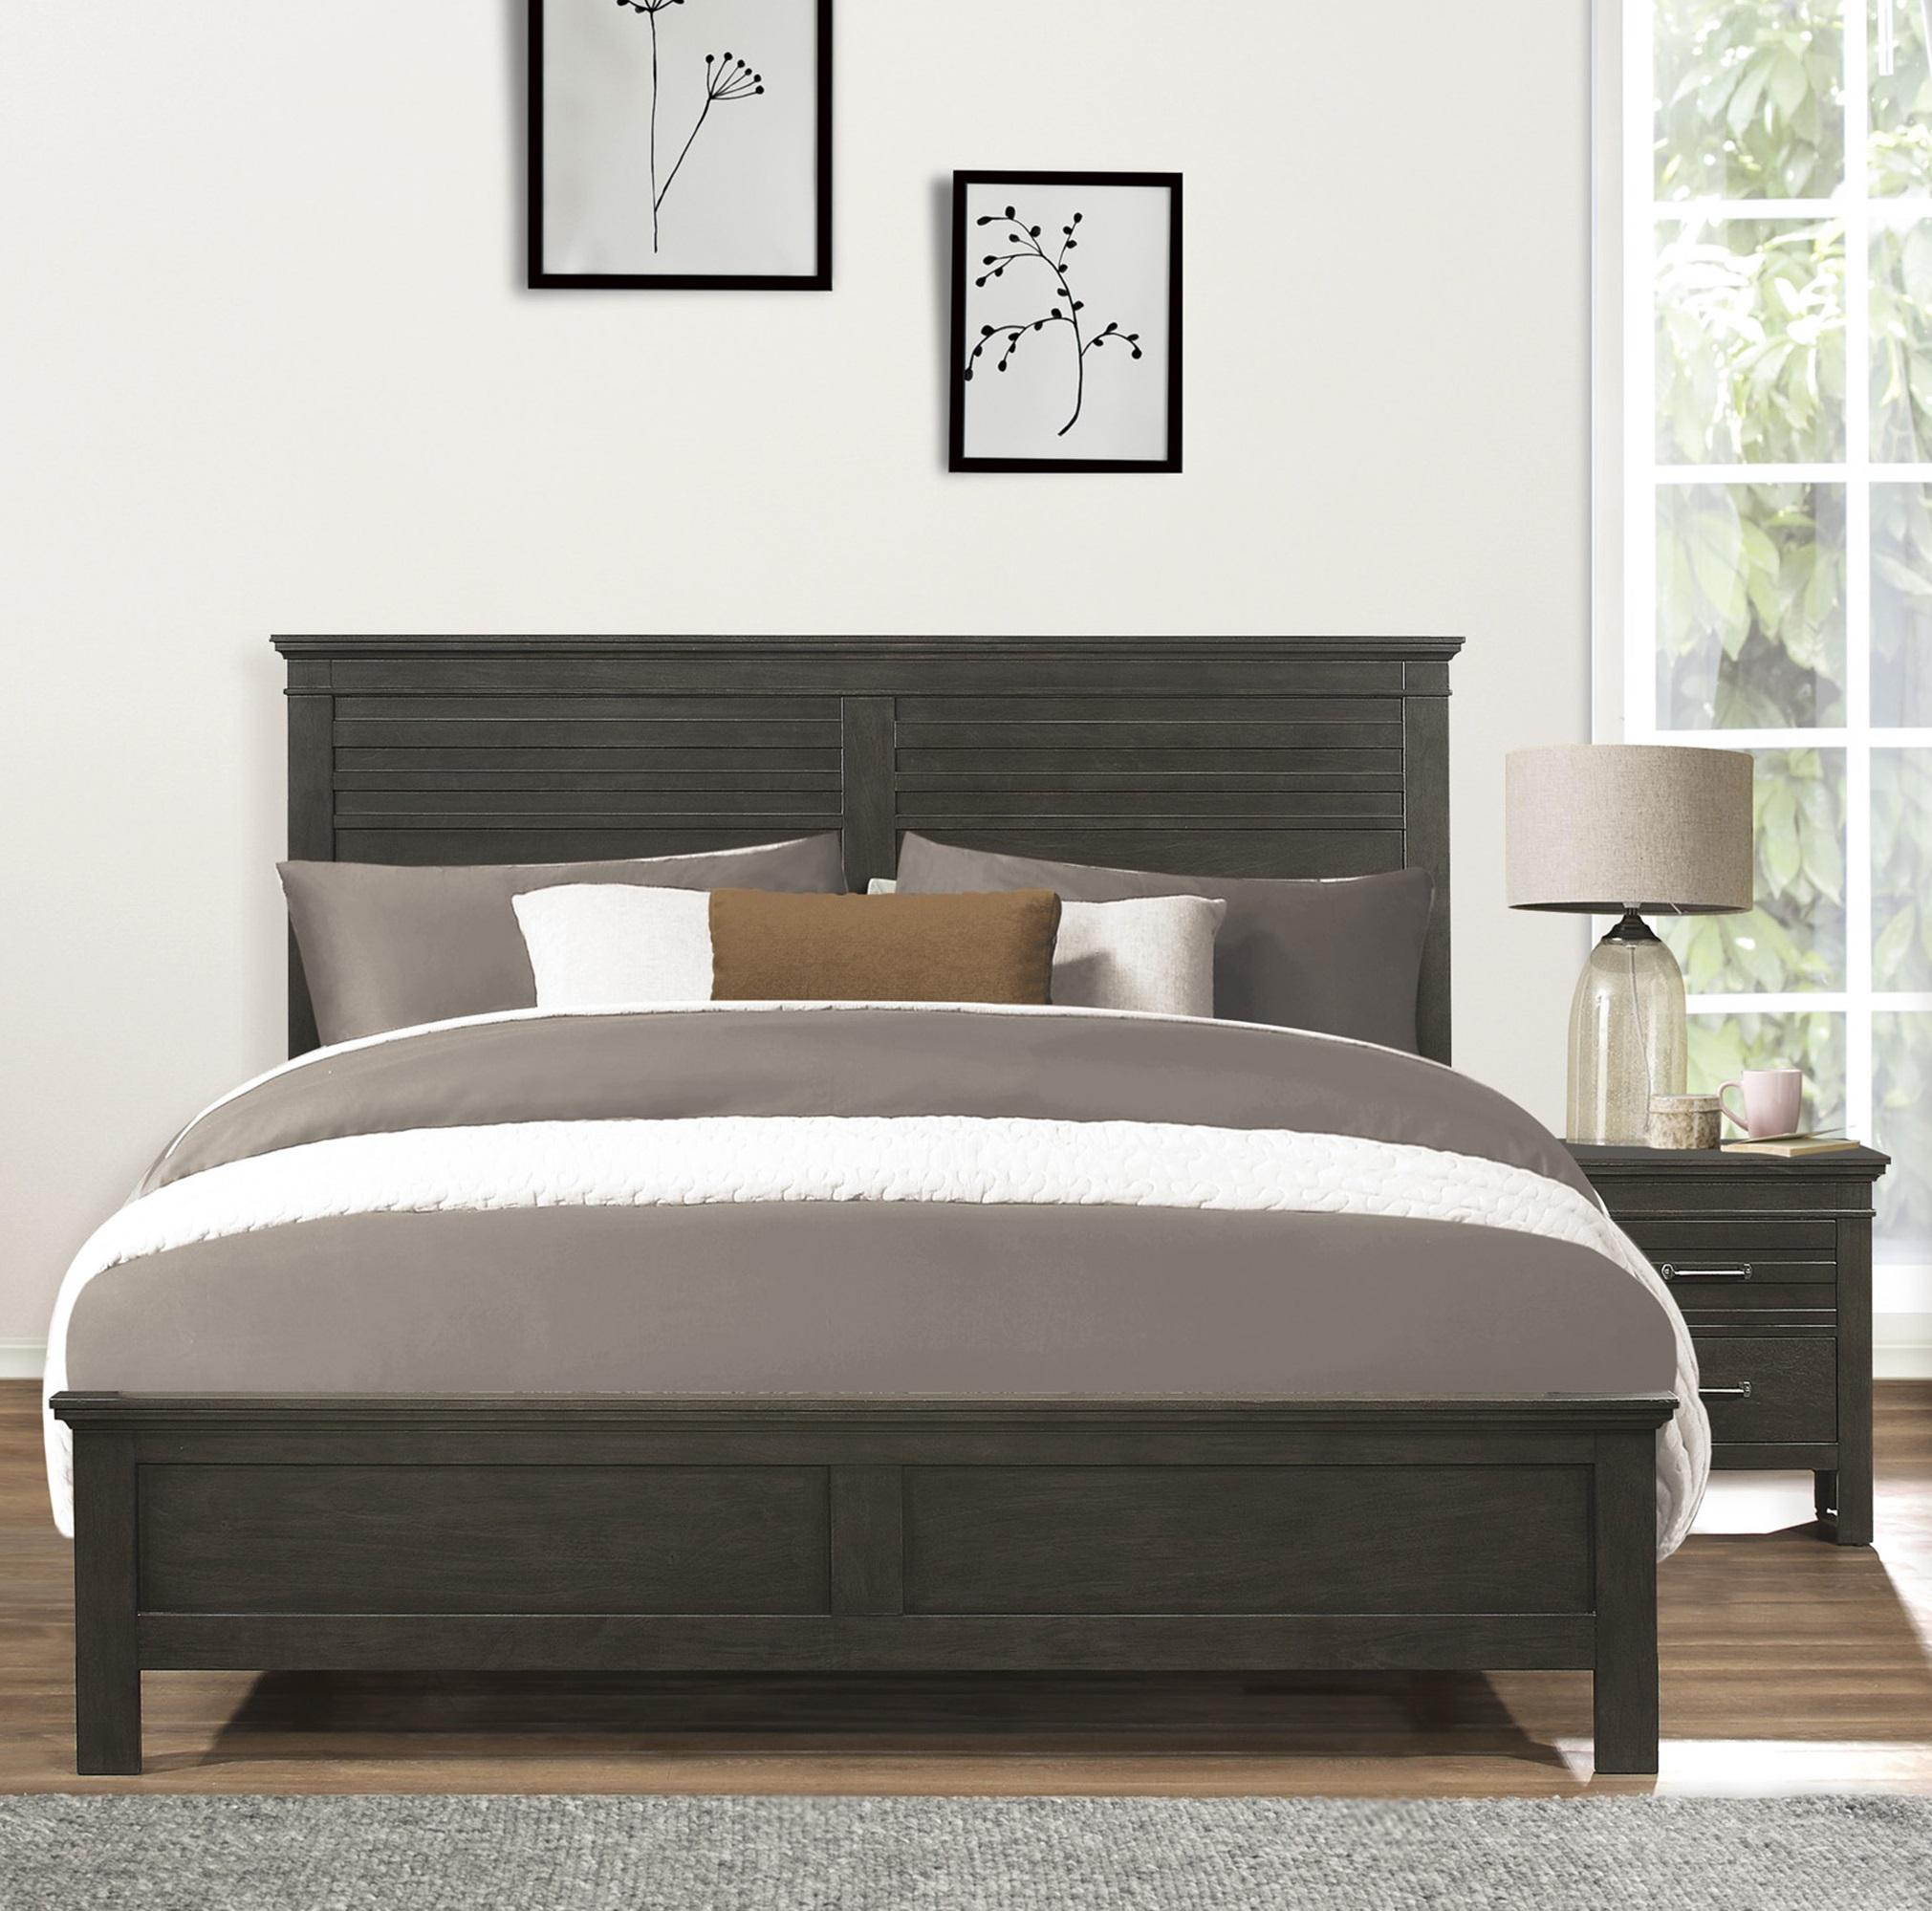 Transitional Bedroom Set 1675-1-3PC Blaire Farm 1675-1-3PC in Charcoal 